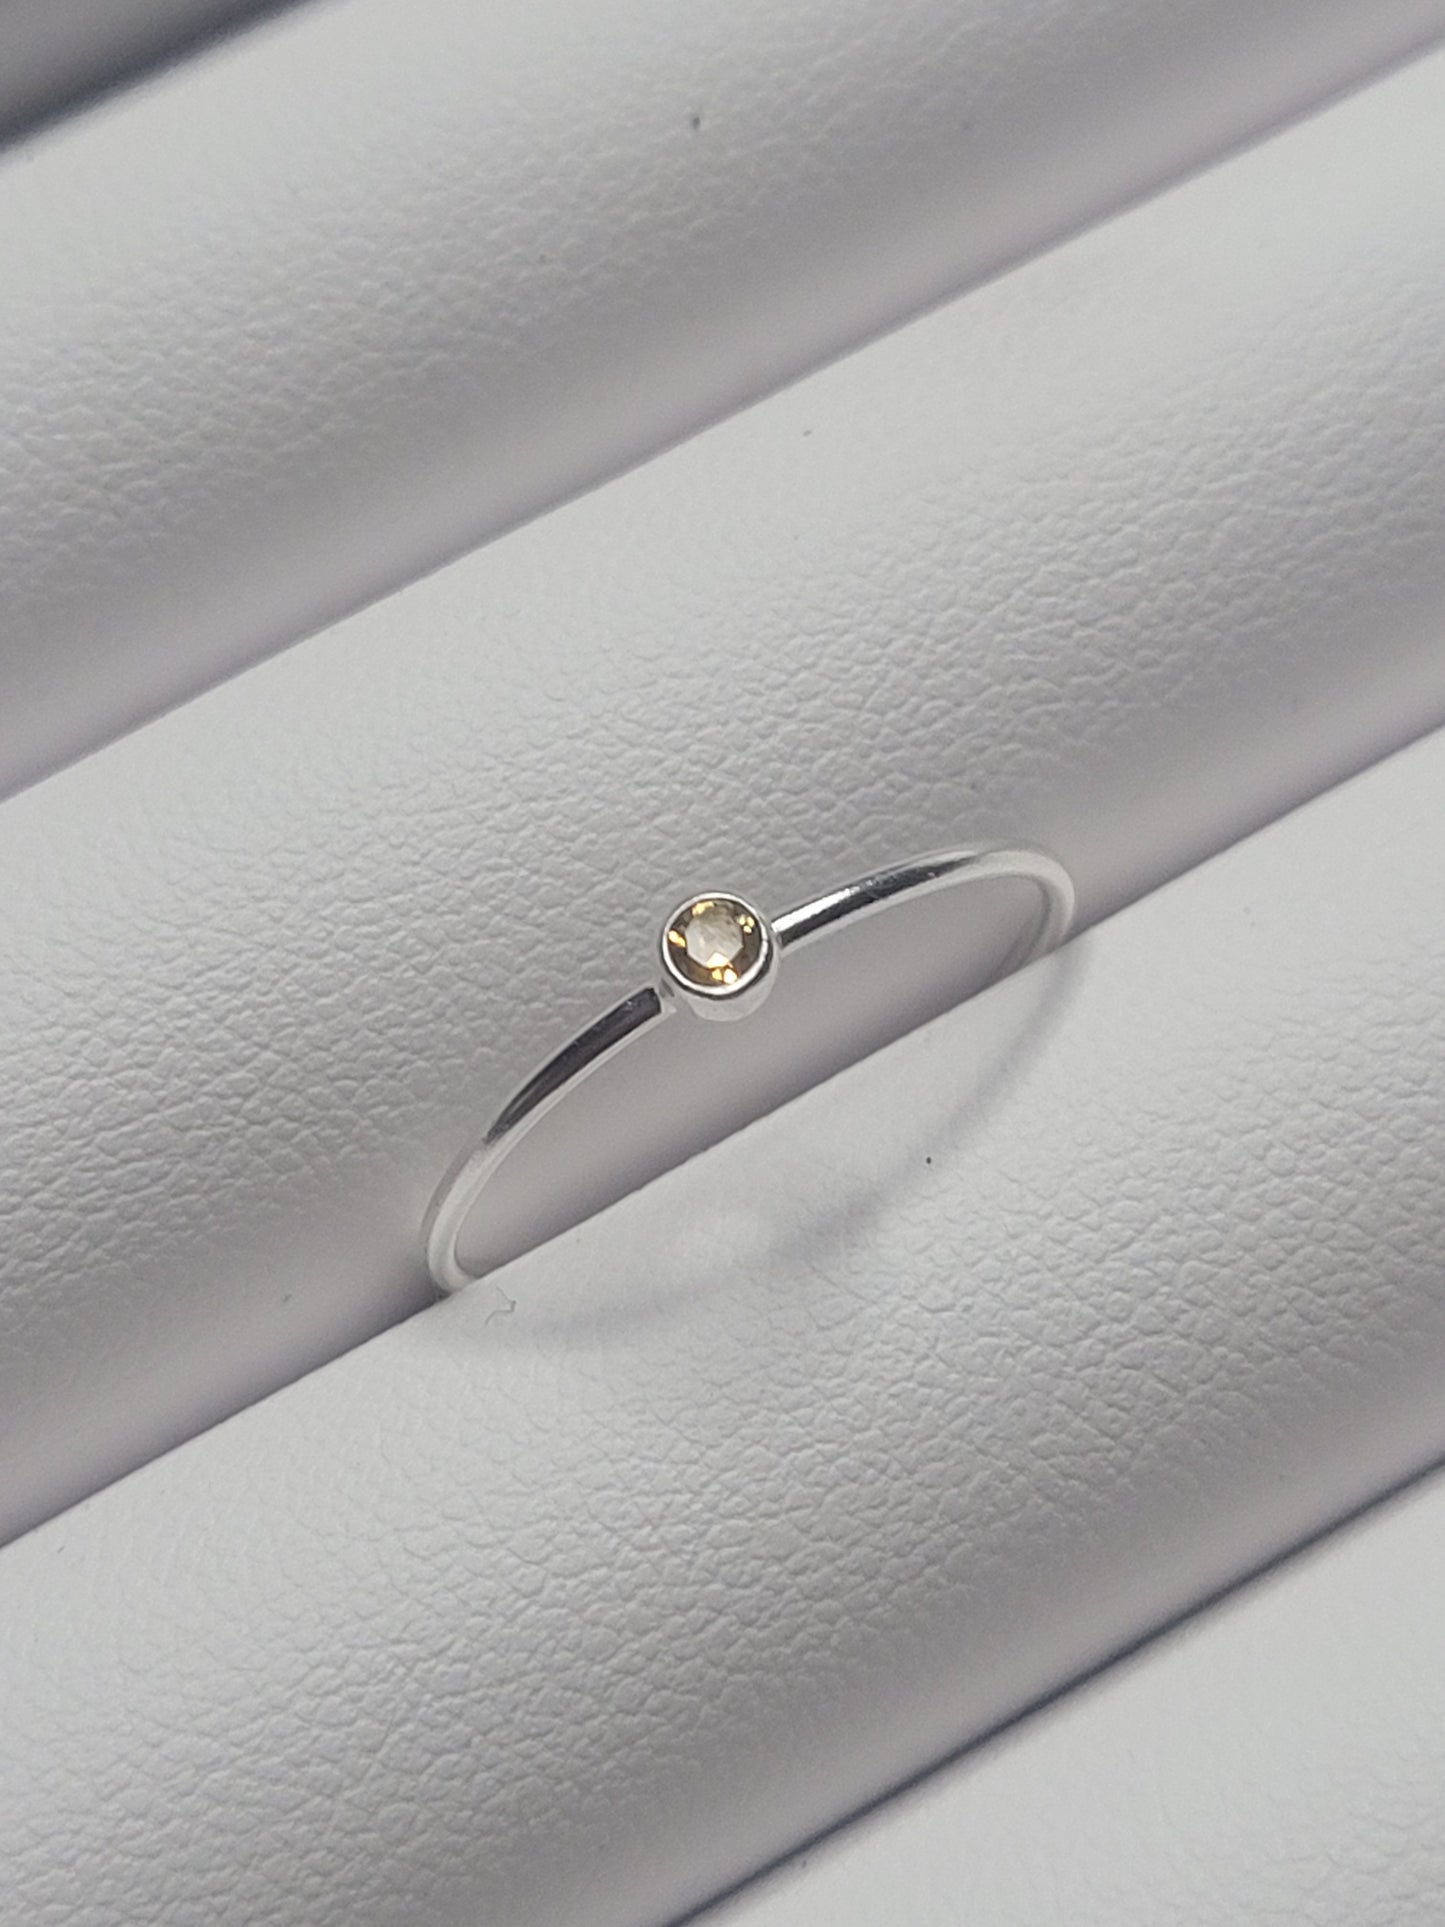 Dainty Solitaire Ring